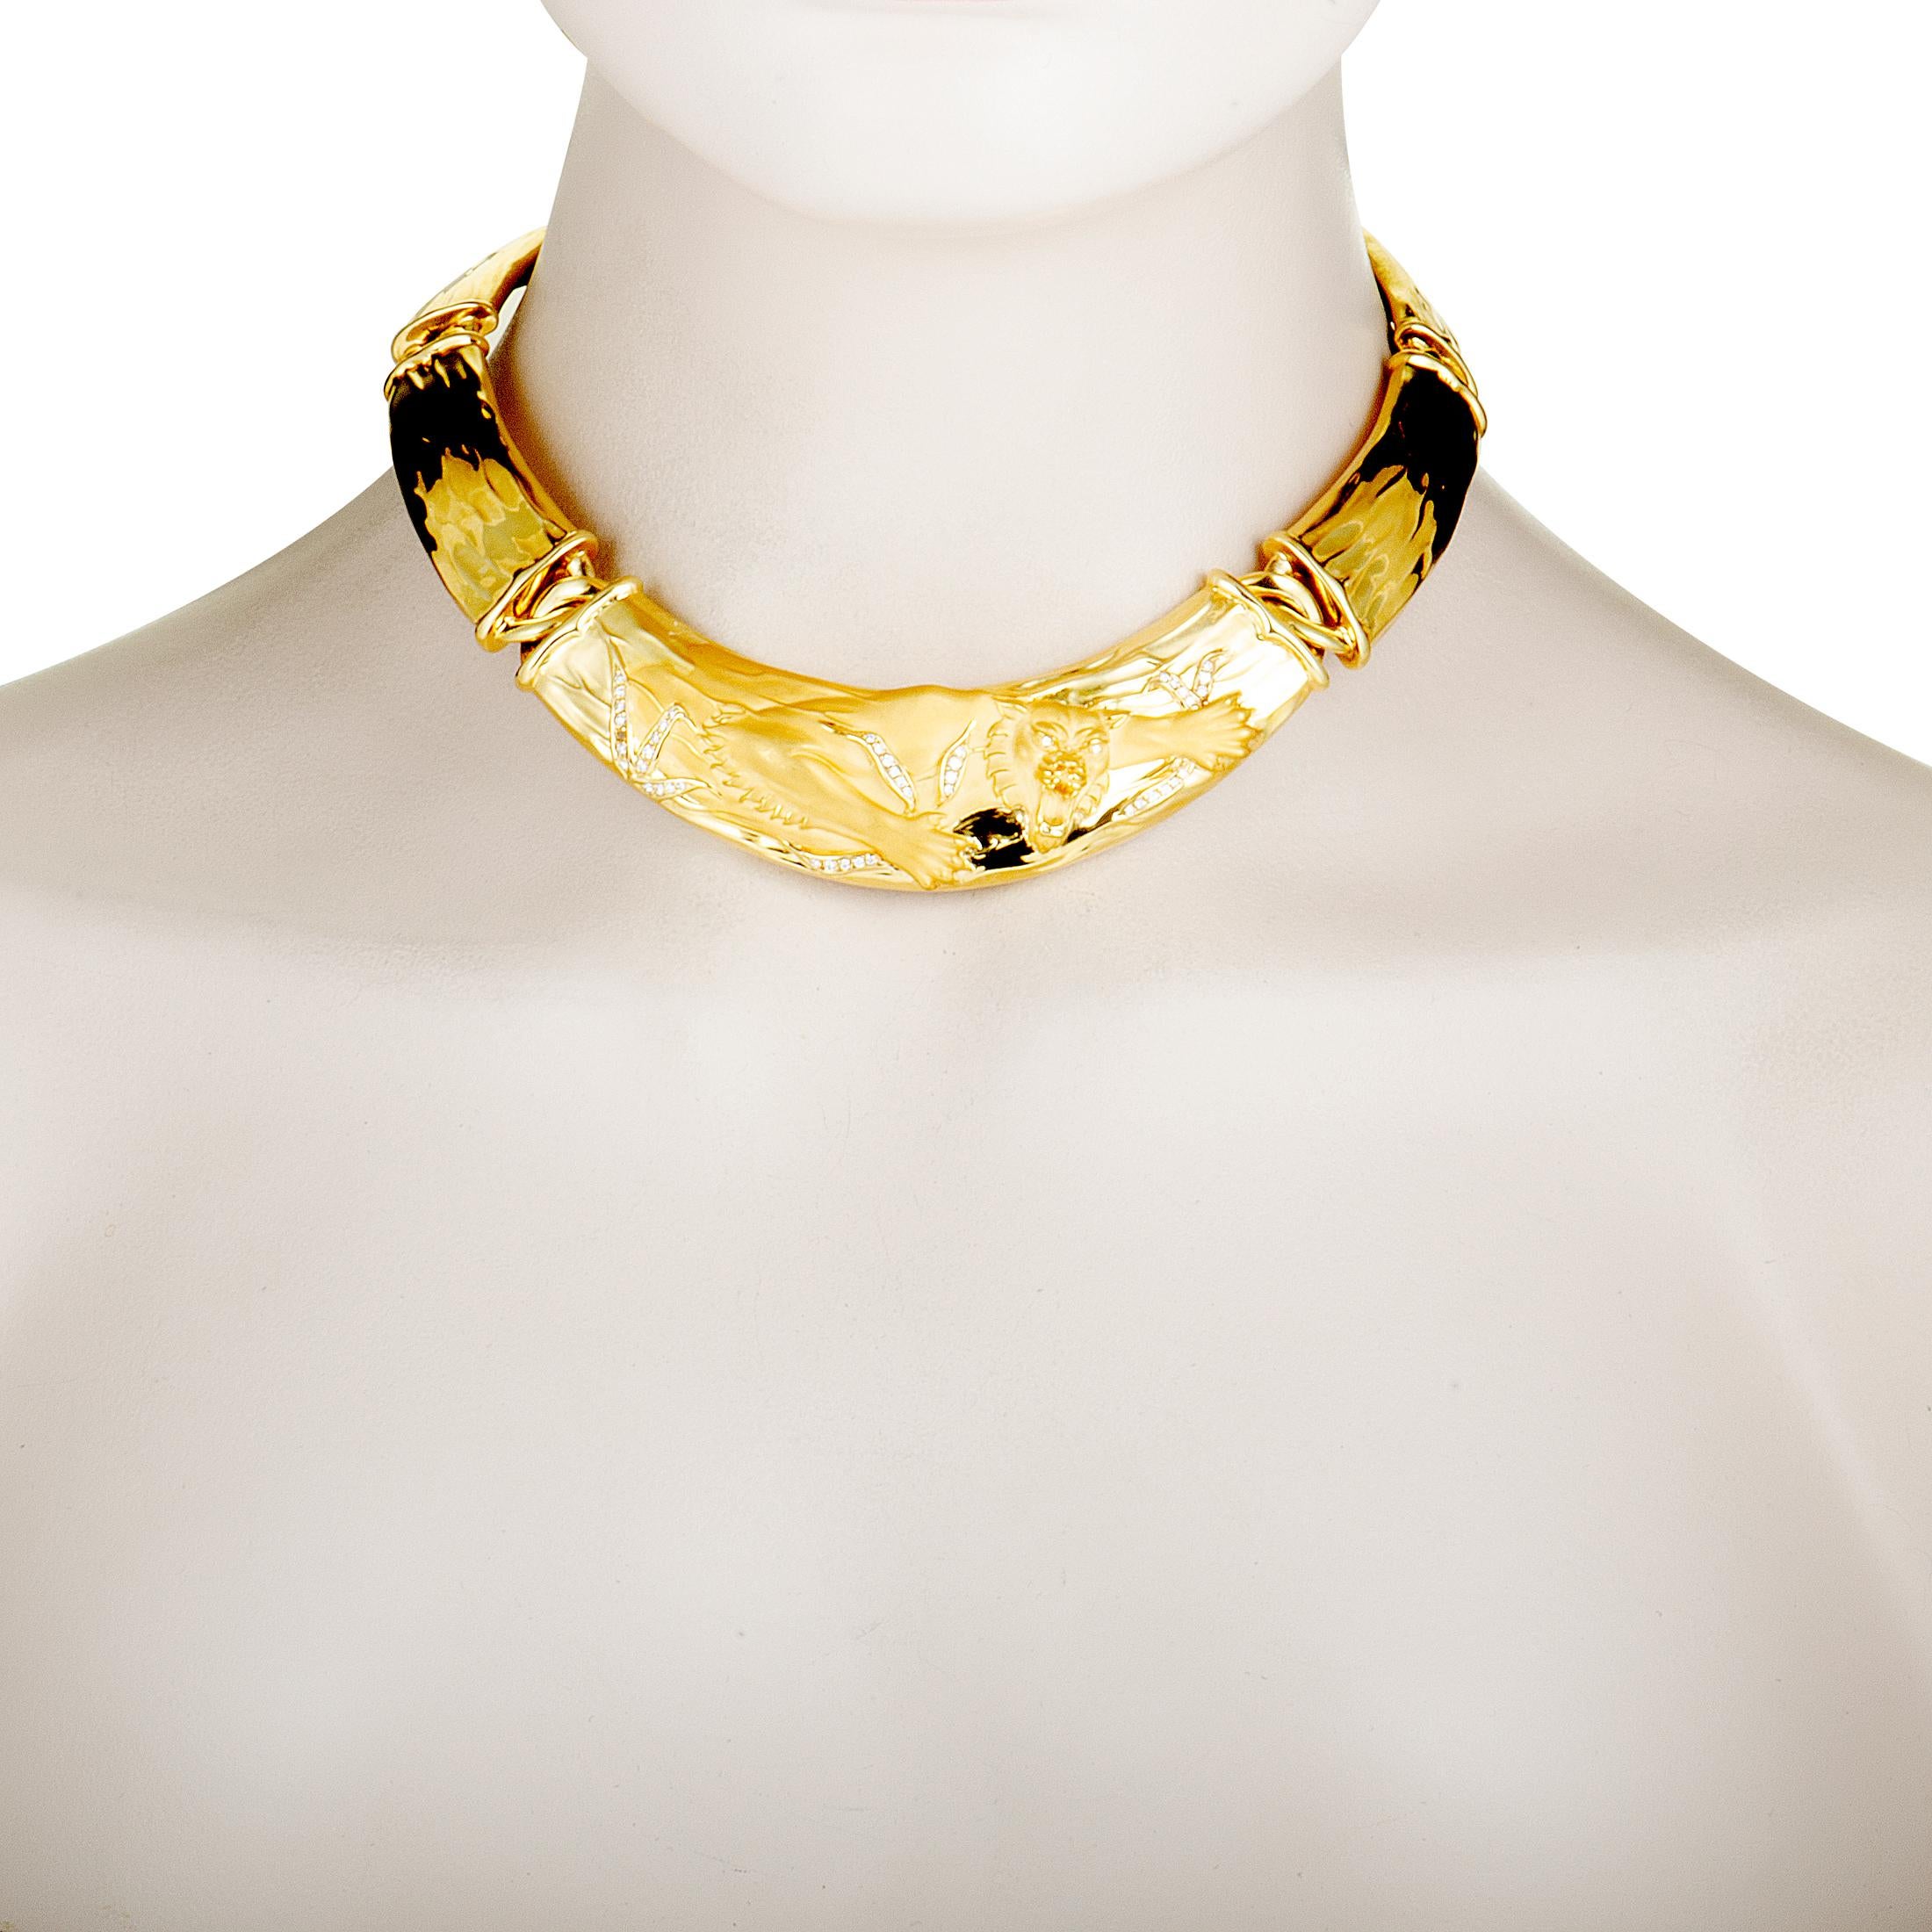 A statement piece that will add a fashionable touch to any ensemble of yours, this extraordinary Carrera y Carrera necklace boasts an incredibly attractive design and exquisite craftsmanship quality. The necklace is made of 18K yellow gold and it is